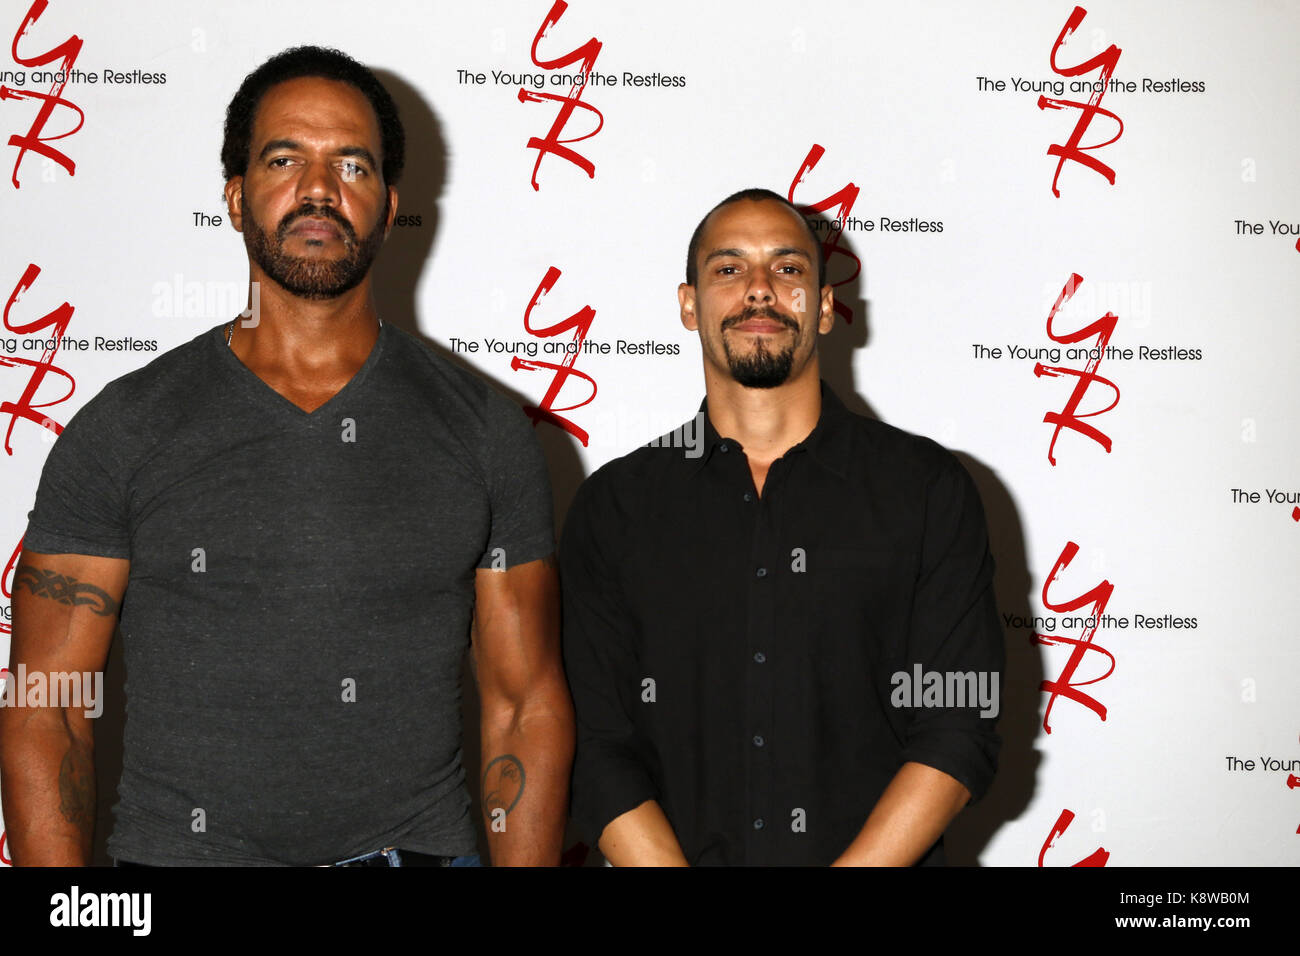 Young and Restless Fan Event 2017 at the Marriott Burbank Convention Center on August 19, 2017 in Burbank, CA  Featuring: Kristoff St John, Bryton James Where: Burbank, California, United States When: 20 Aug 2017 Credit: Nicky Nelson/WENN.com Stock Photo